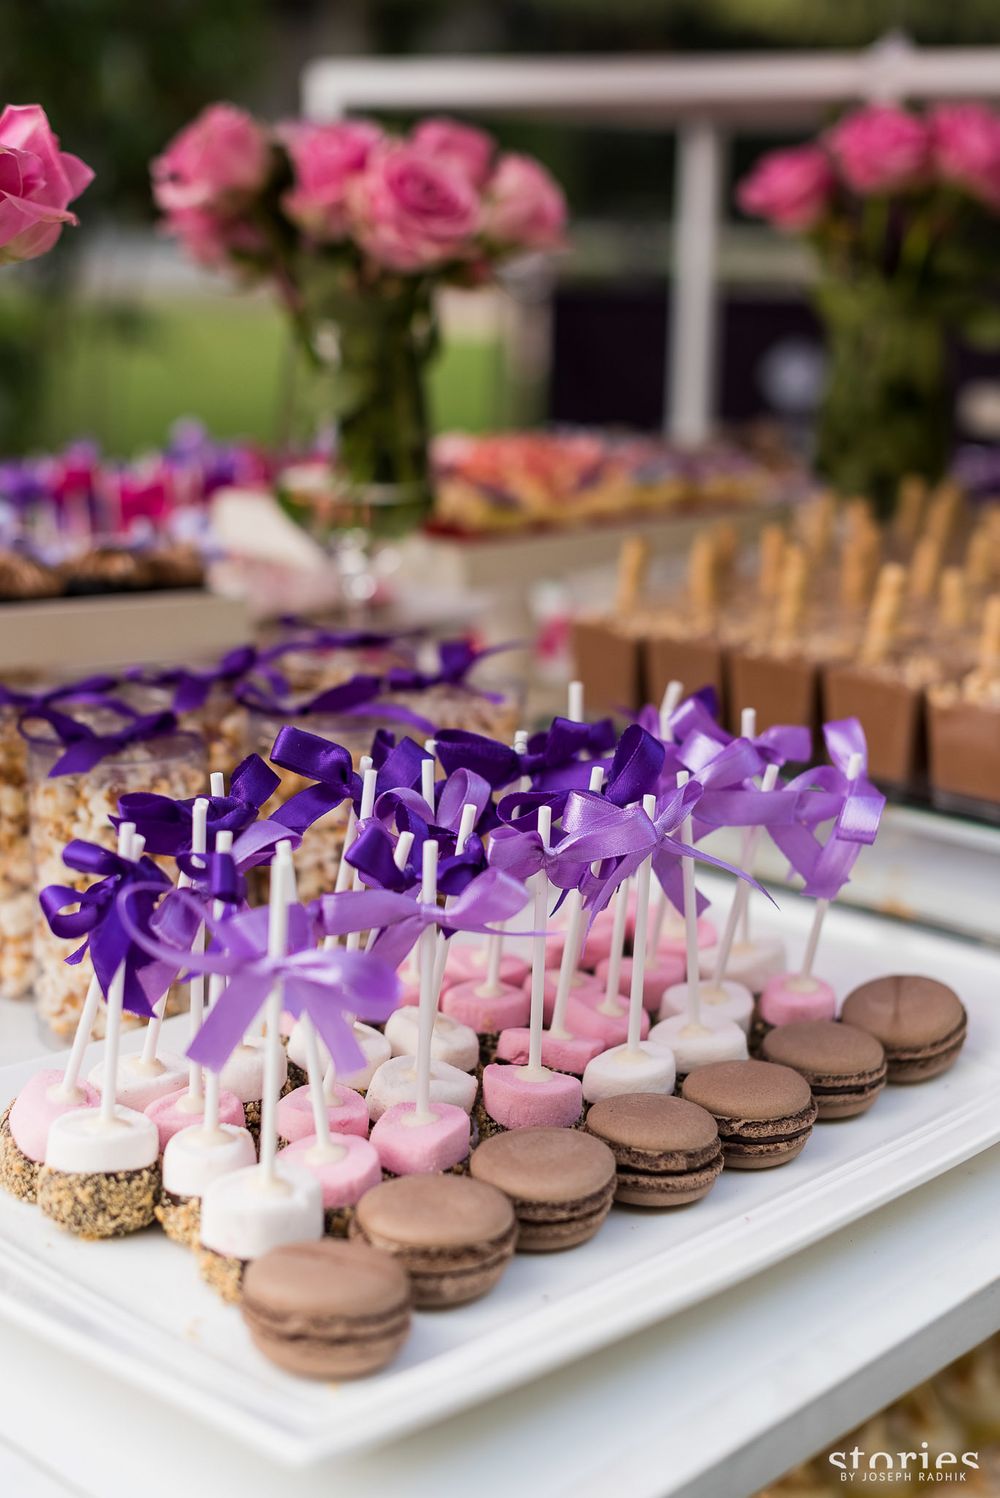 Photo of Dessert ideas with cakesickles and macarons on sticks